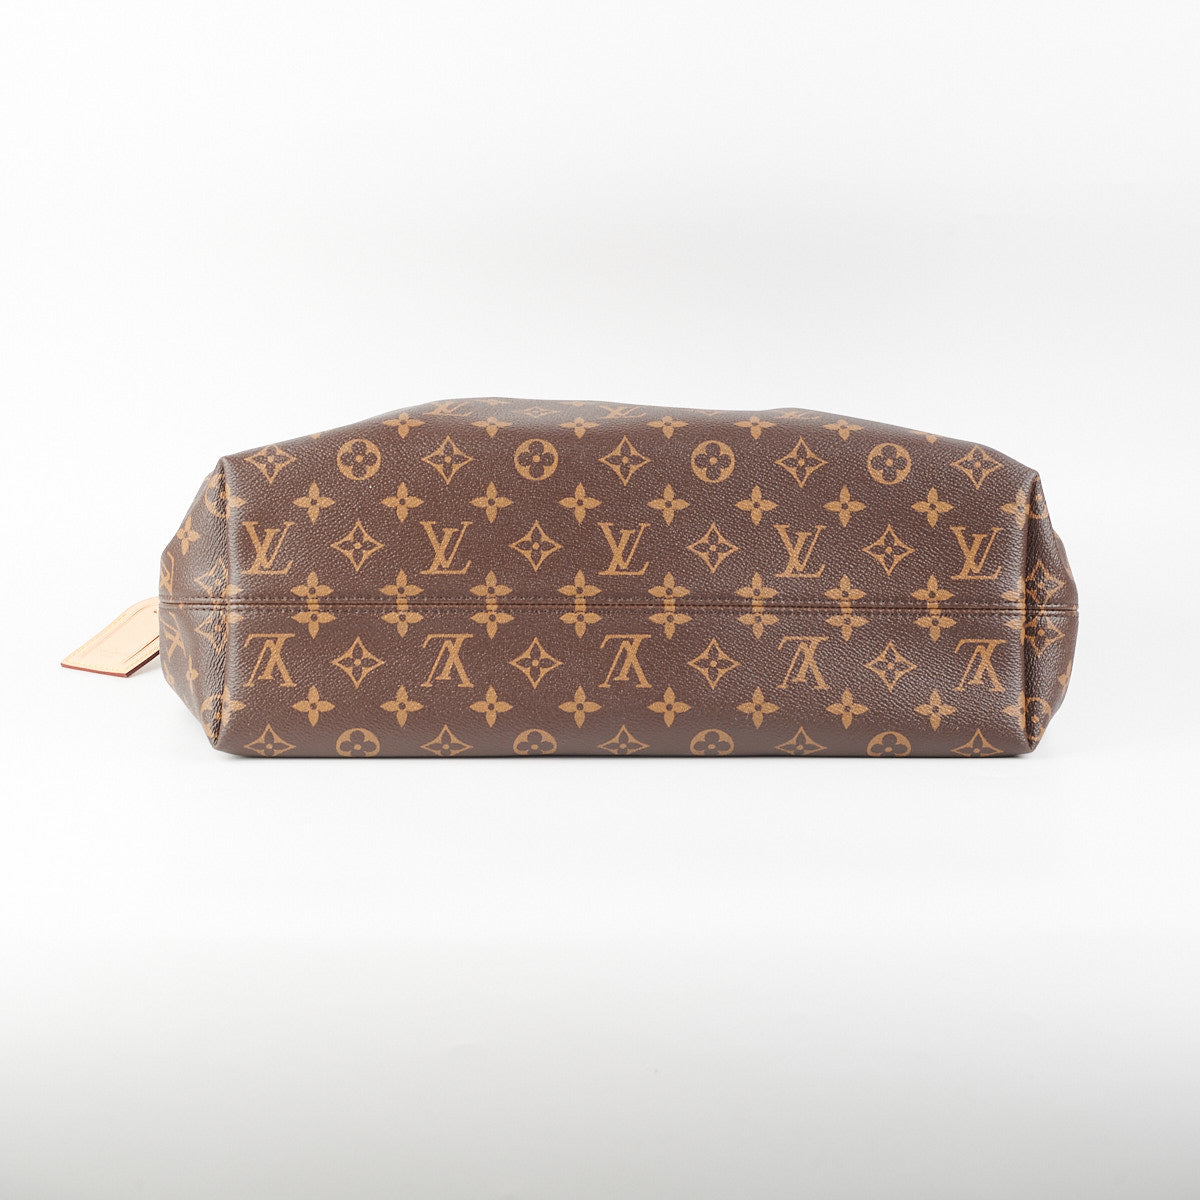 Louis Vuitton Graceful MM » S&I Styling